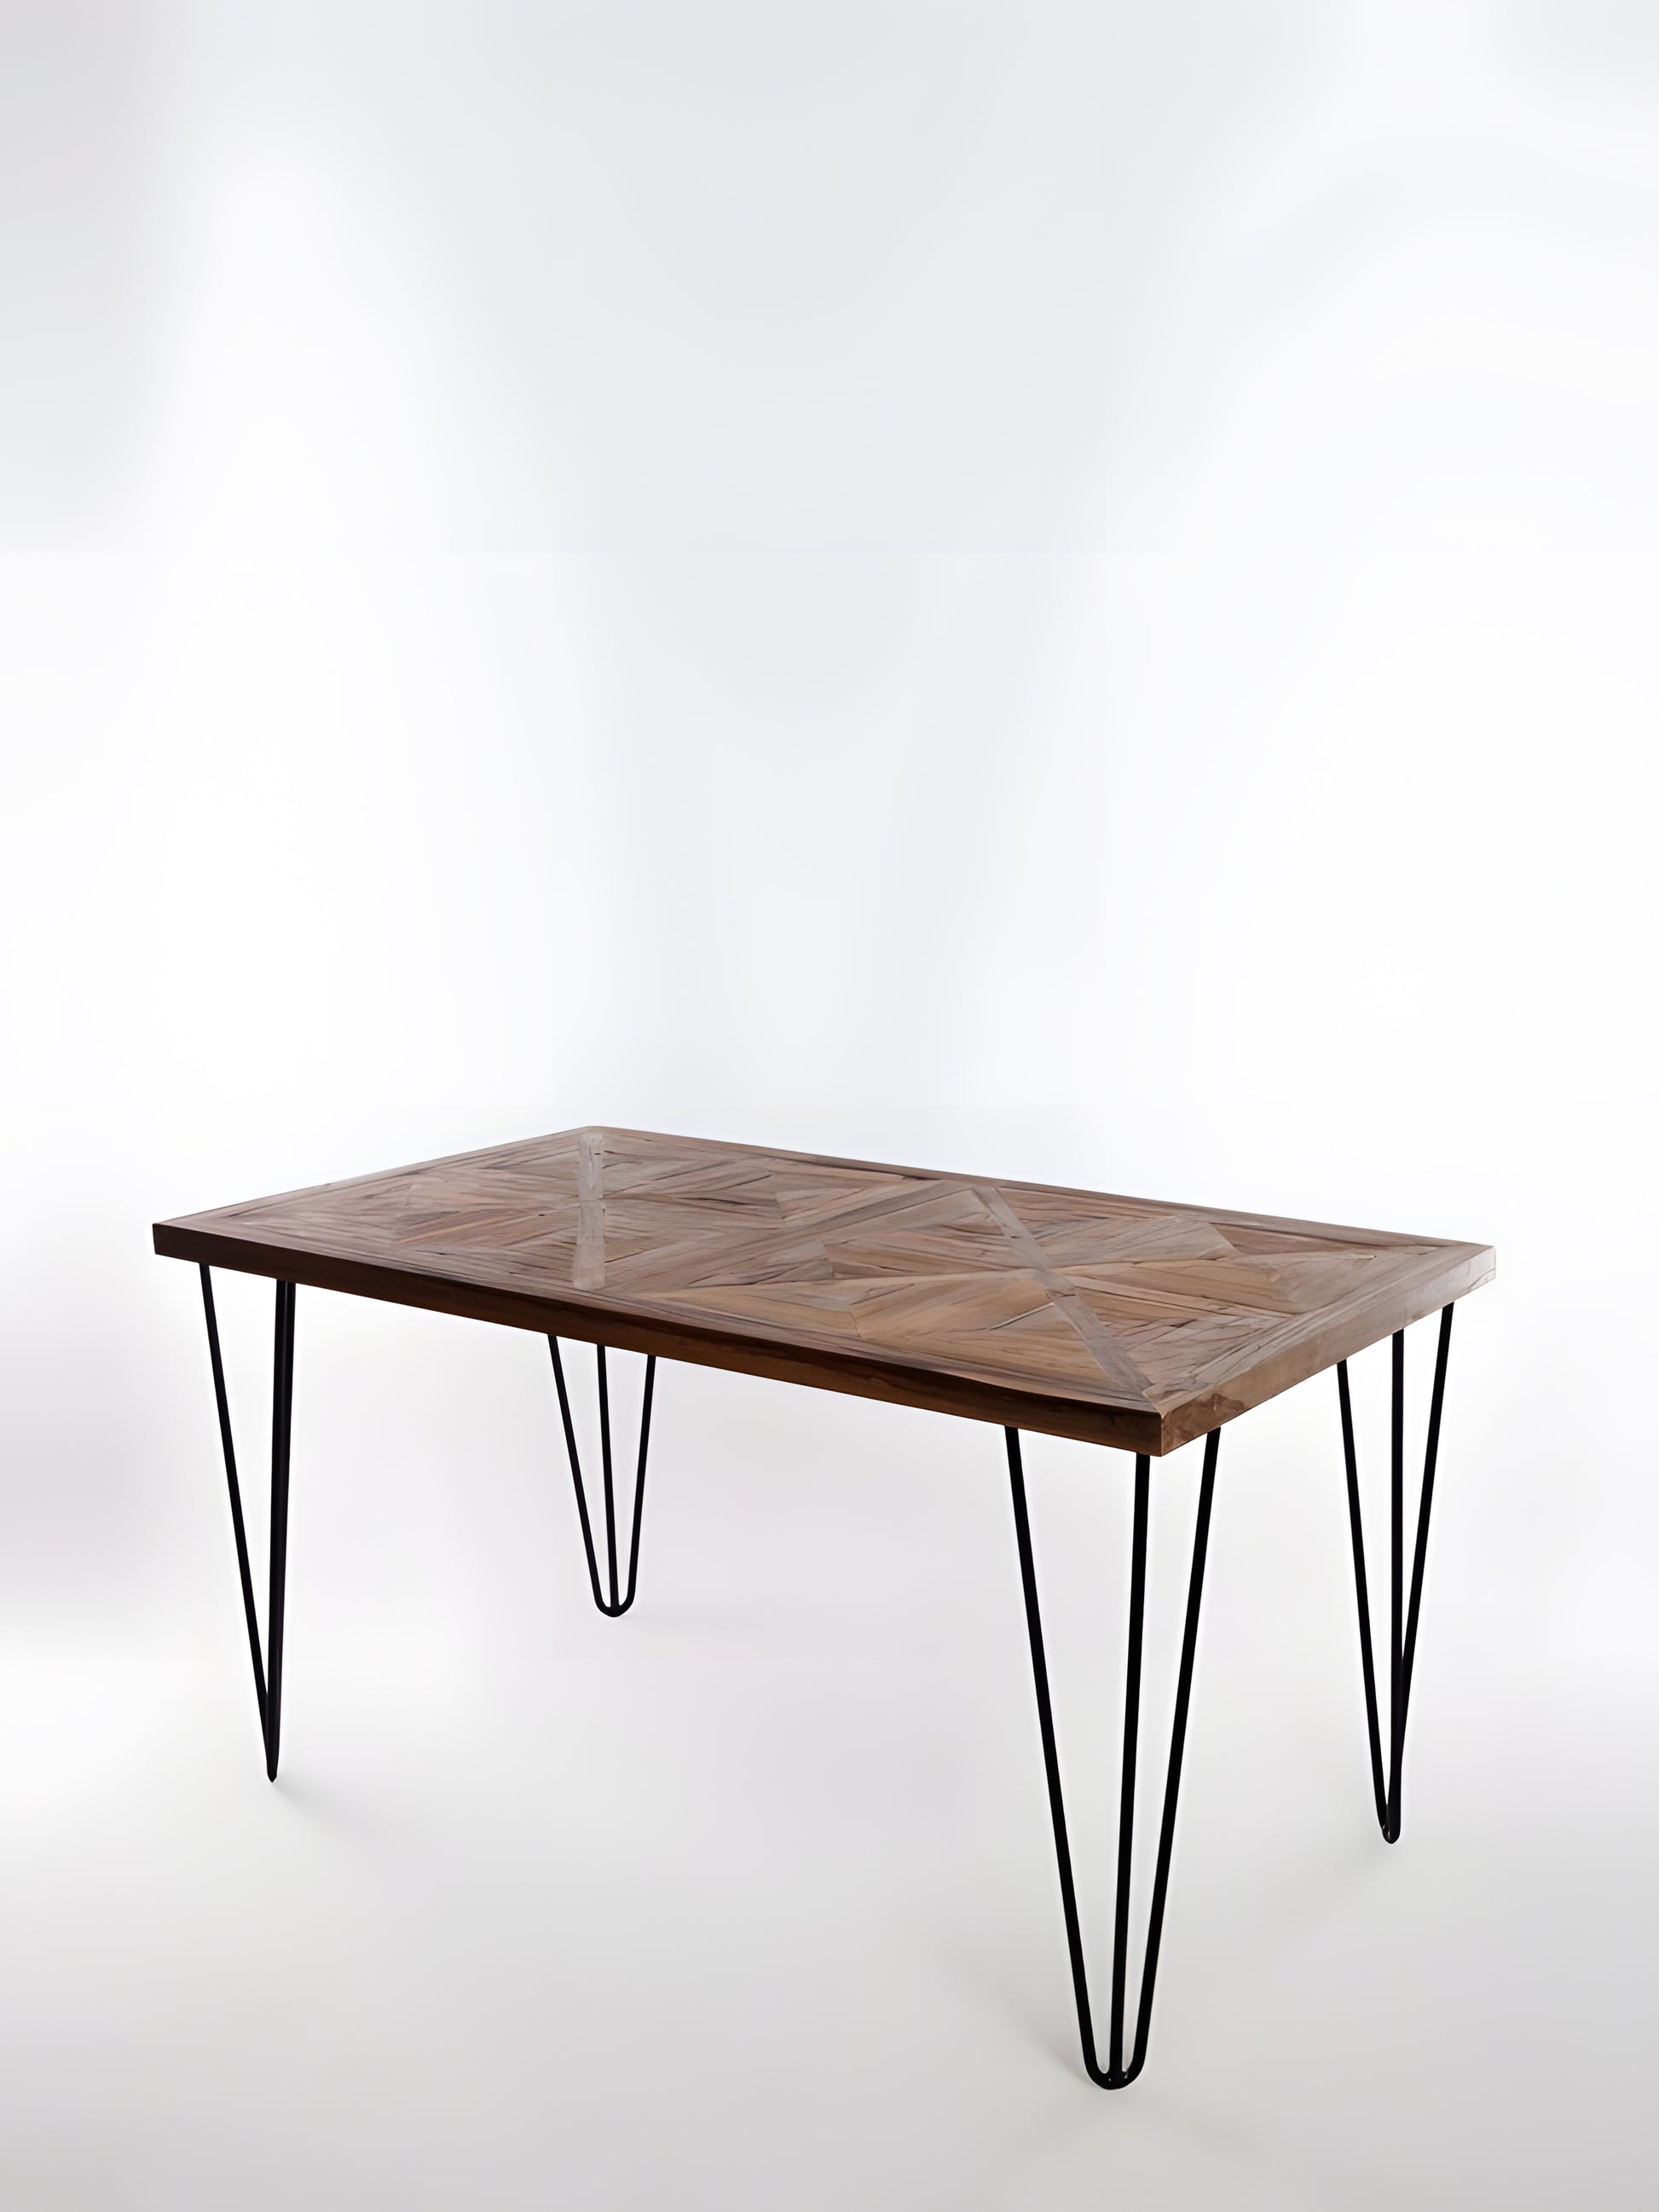 Segovia Reclaimed Teakwood Small Dining Table with black hairpin legs front view by Mellowdays Furniture